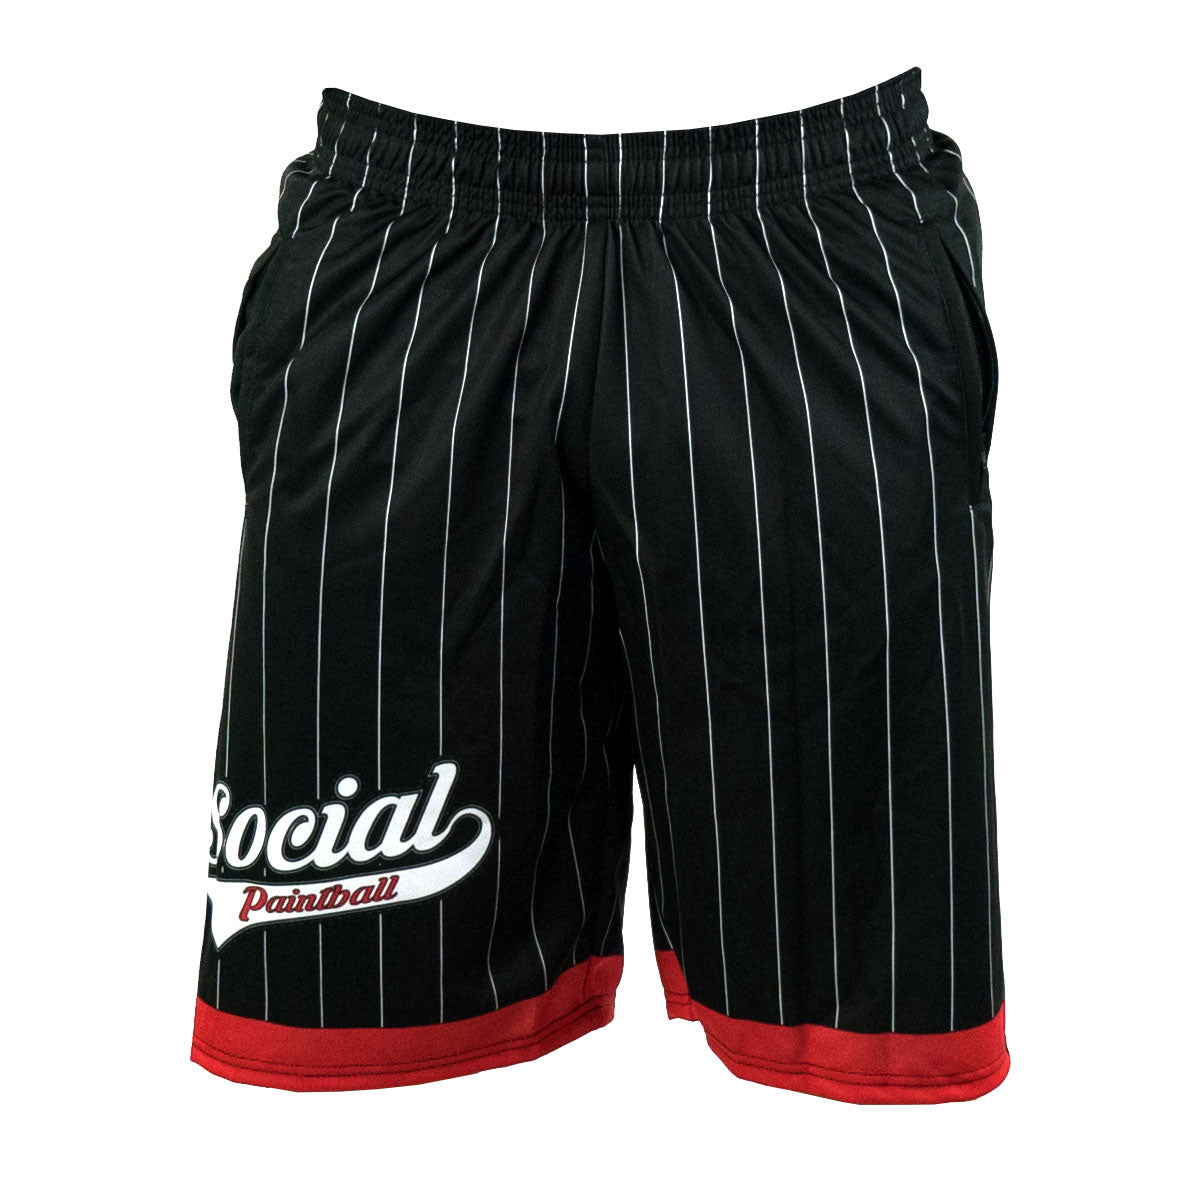 Grit Shorts, Red Black Pinstripe | Casual Shorts